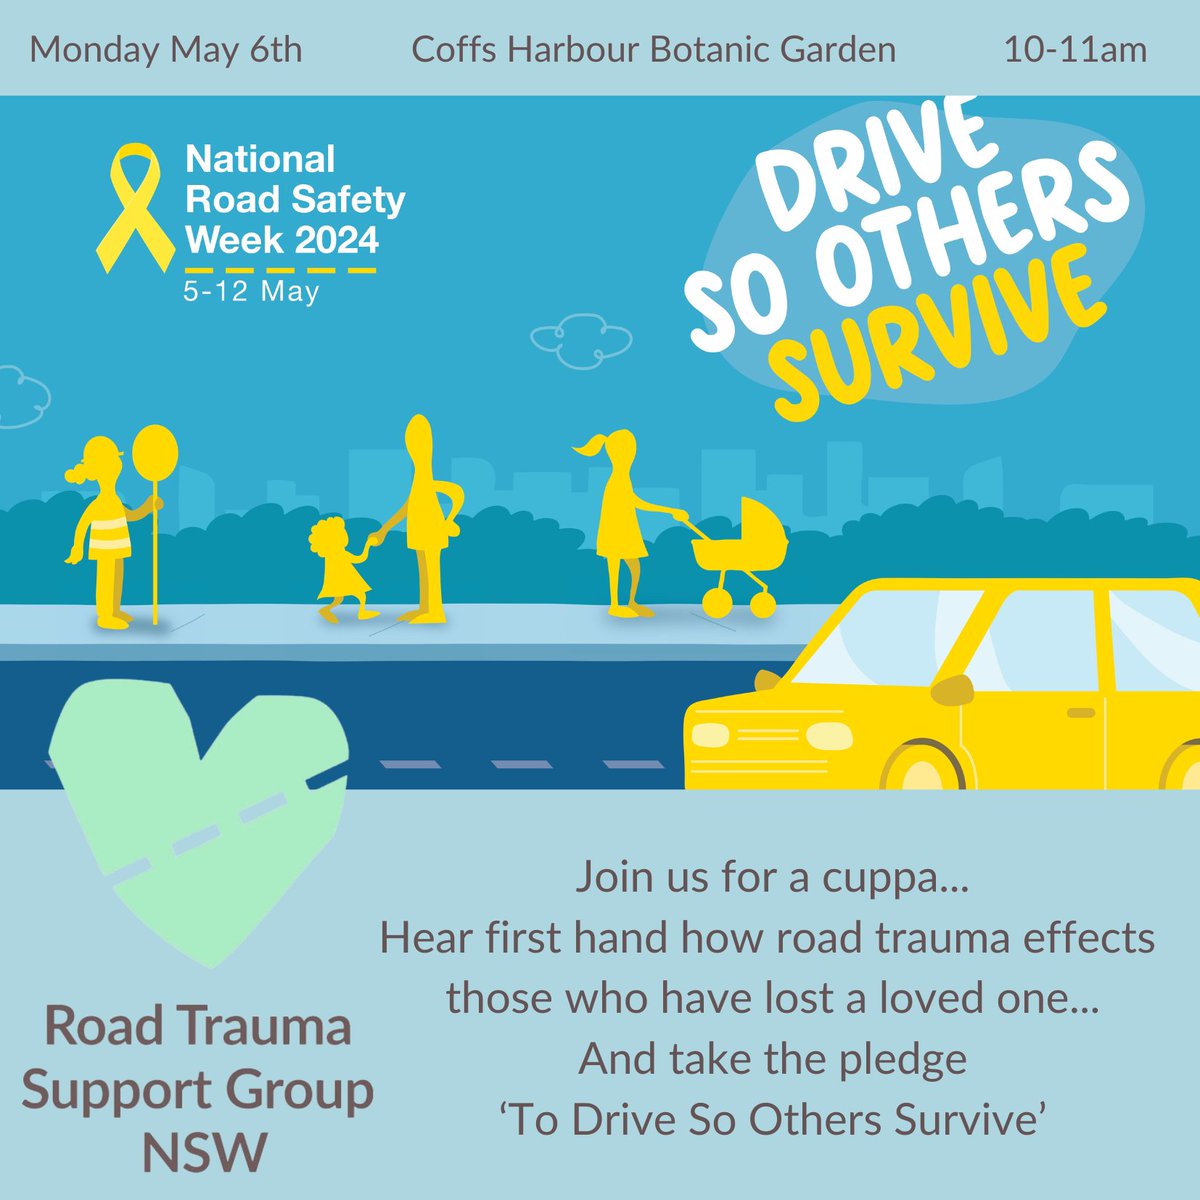 This National Road Safety Week join us for our 1st regional visit! Meet us at North Coast Regional Botanic Garden - May 6th -  10-11am. Enjoy morning tea, hear our member Katie's story and take the road safety pledge. RSVP now: rb.gy/h4vvkm
#NRSW #RTSG #RoadSafety